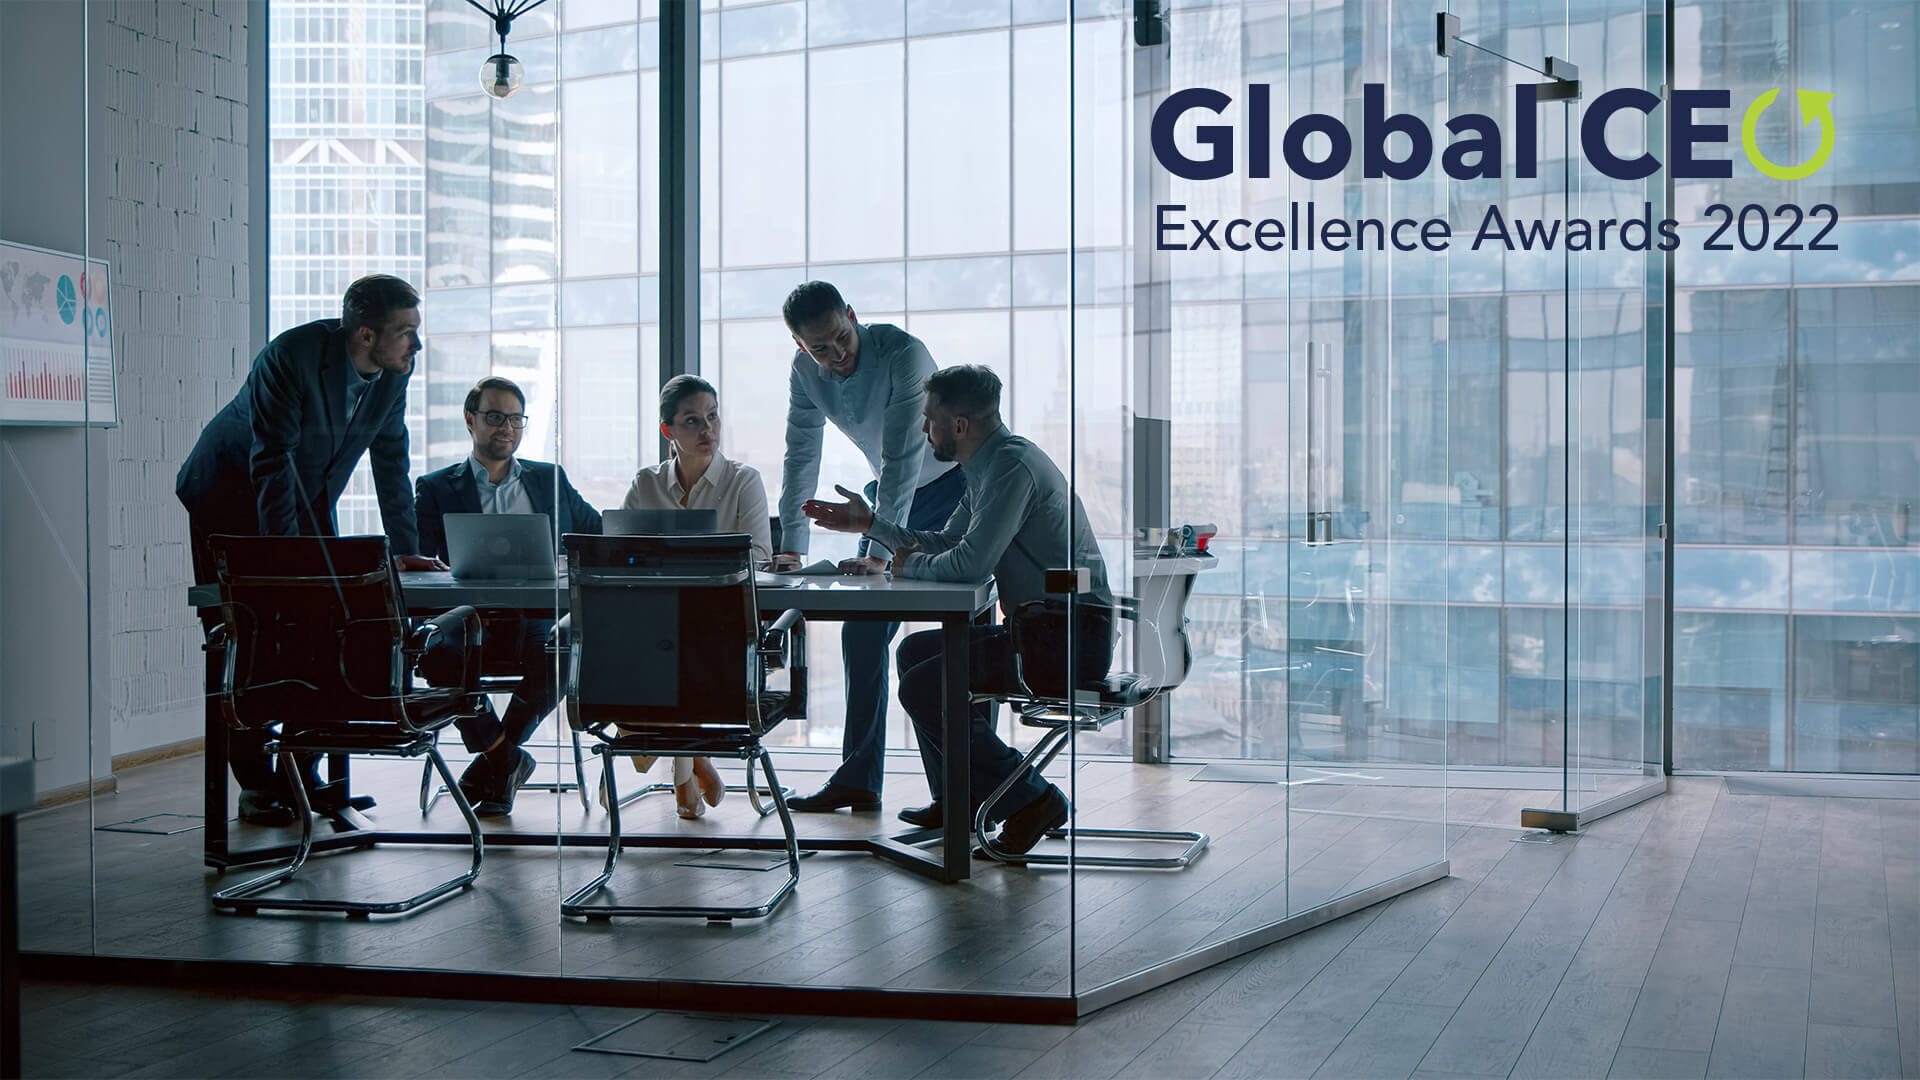 CEO Monthly Magazine Announces the Winners of the 2022 Global CEO Excellence Awards